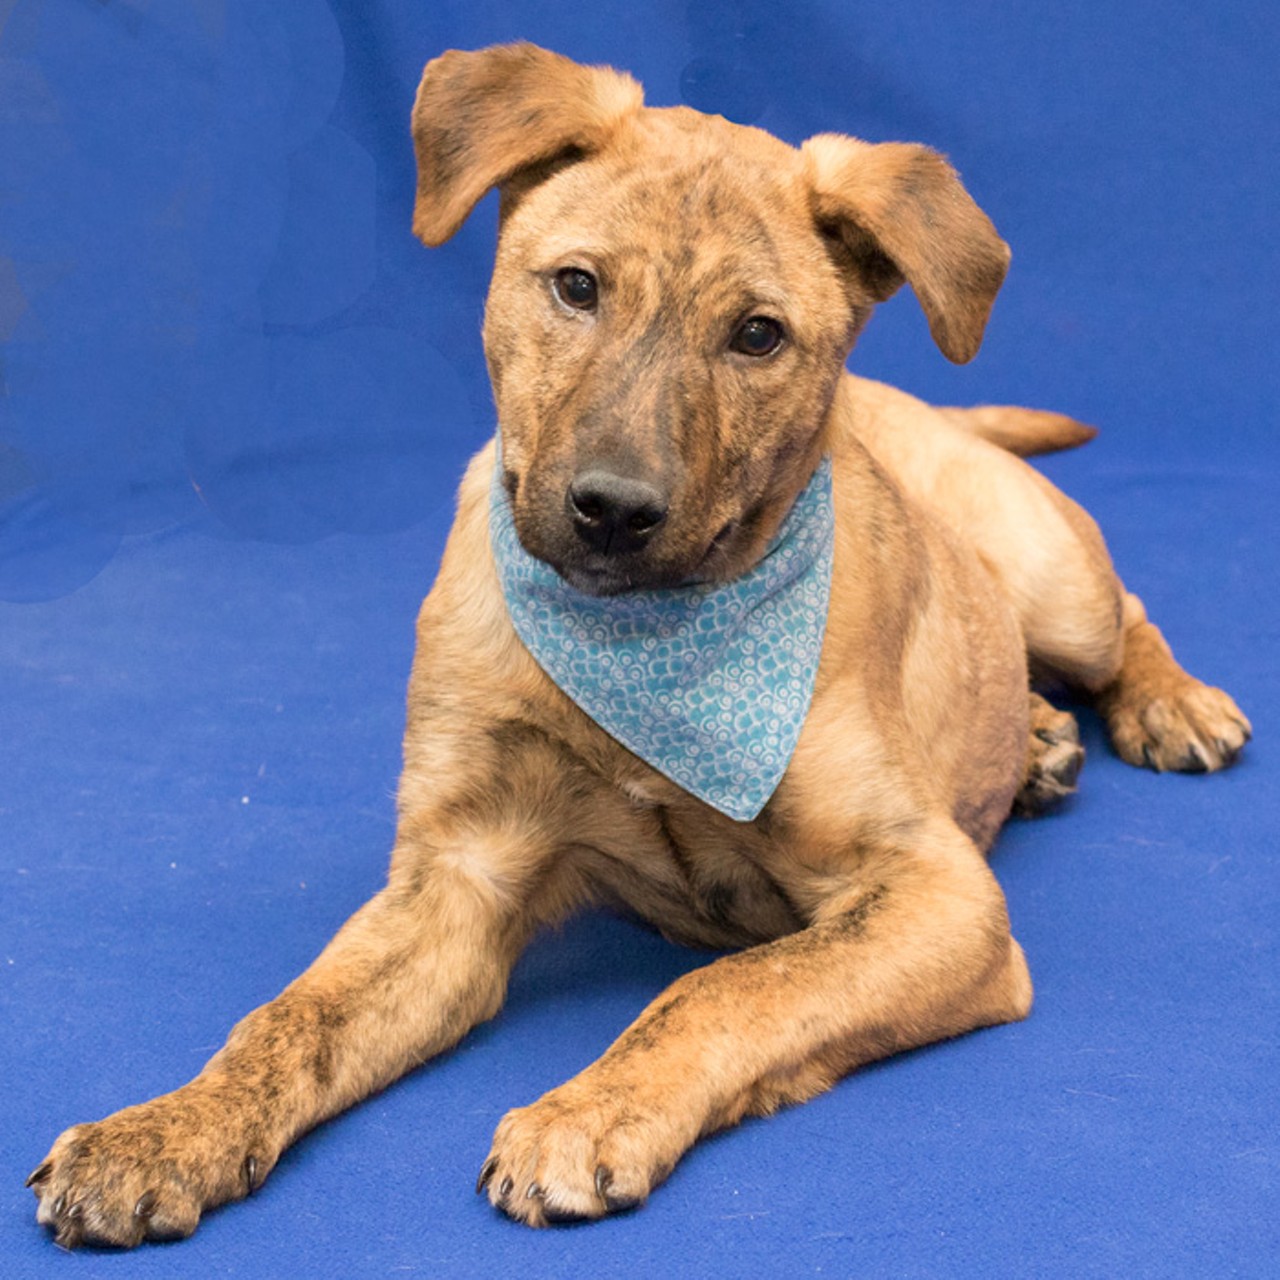 NAME: Little Bear
GENDER: Male
BREED: Mountain Cur
AGE: 5 months
WEIGHT: 24 pounds (Projection: 55-80 pounds)
SPECIAL CONSIDERATIONS: Plays too rough for young children
REASON I CAME TO MHS: Agency transfer
LOCATION: Berman Center for Animal Care in Westland
ID NUMBER: 861547